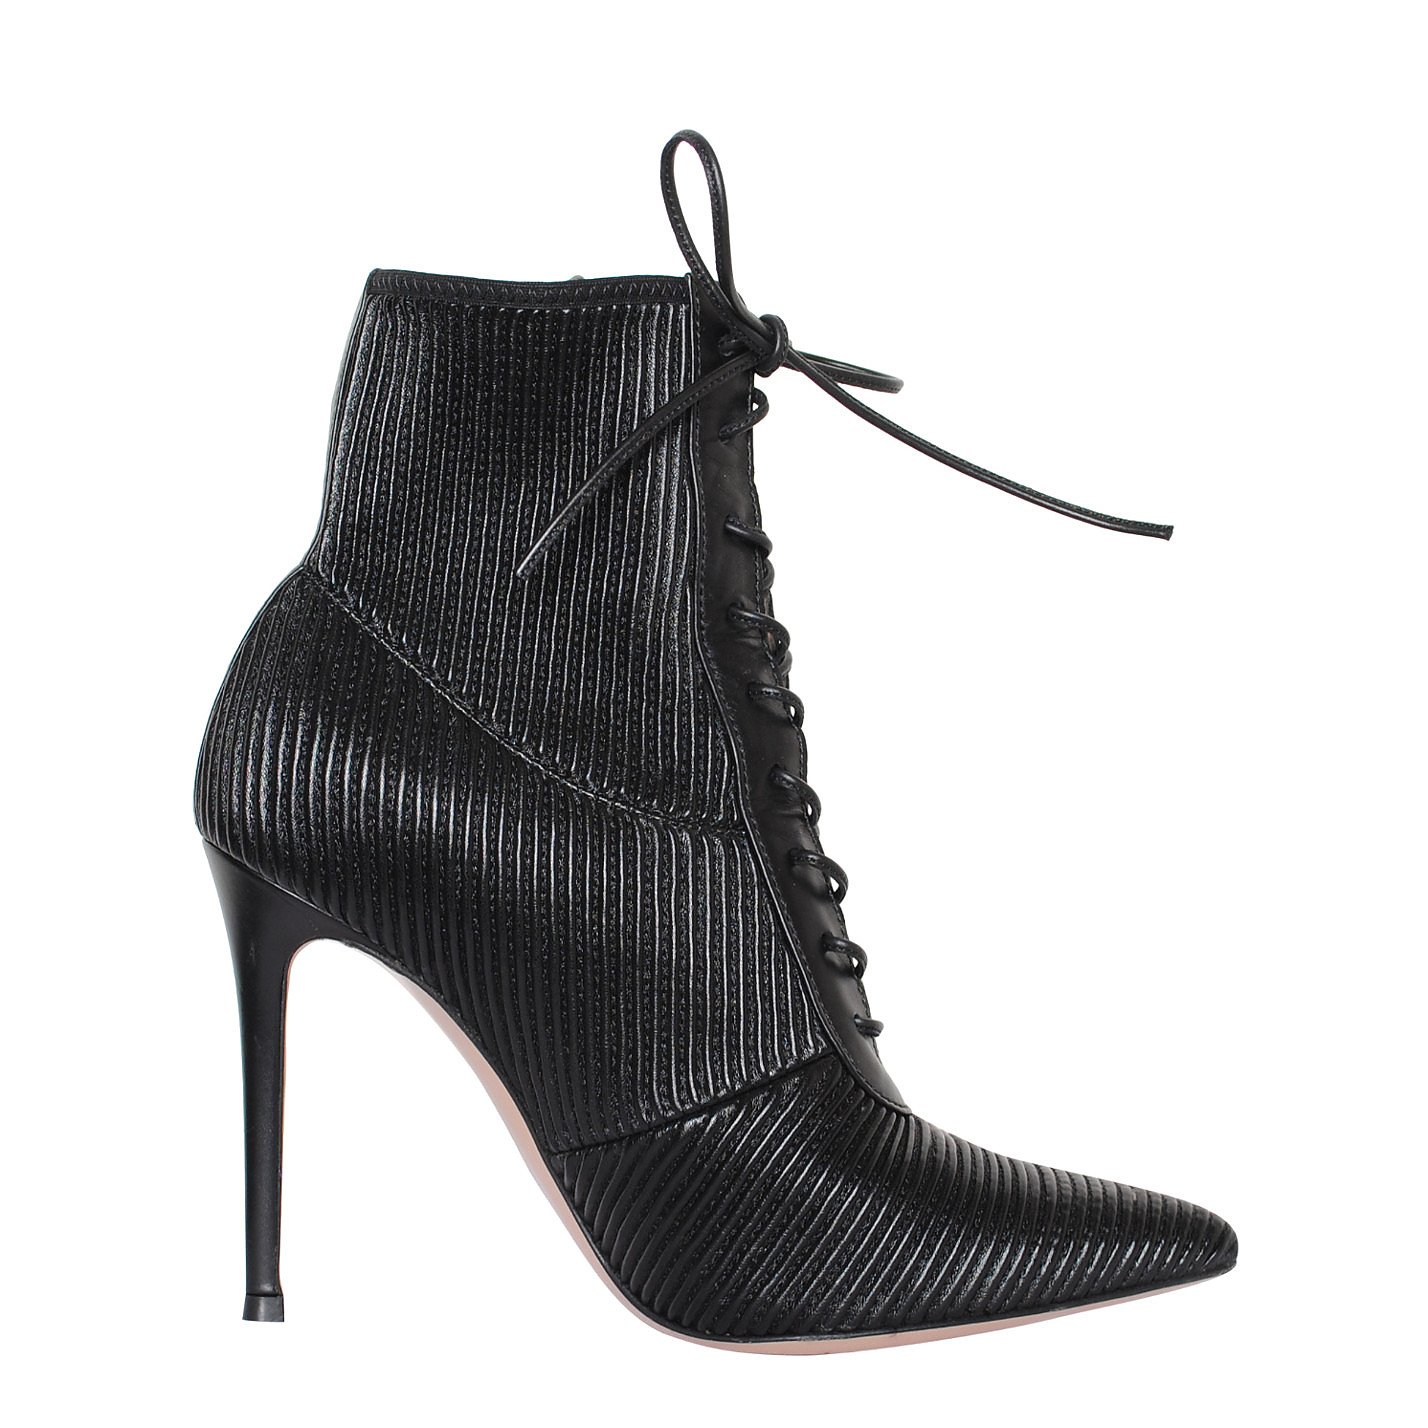 GIANVITO ROSSI Lace-Up Ankle Boots